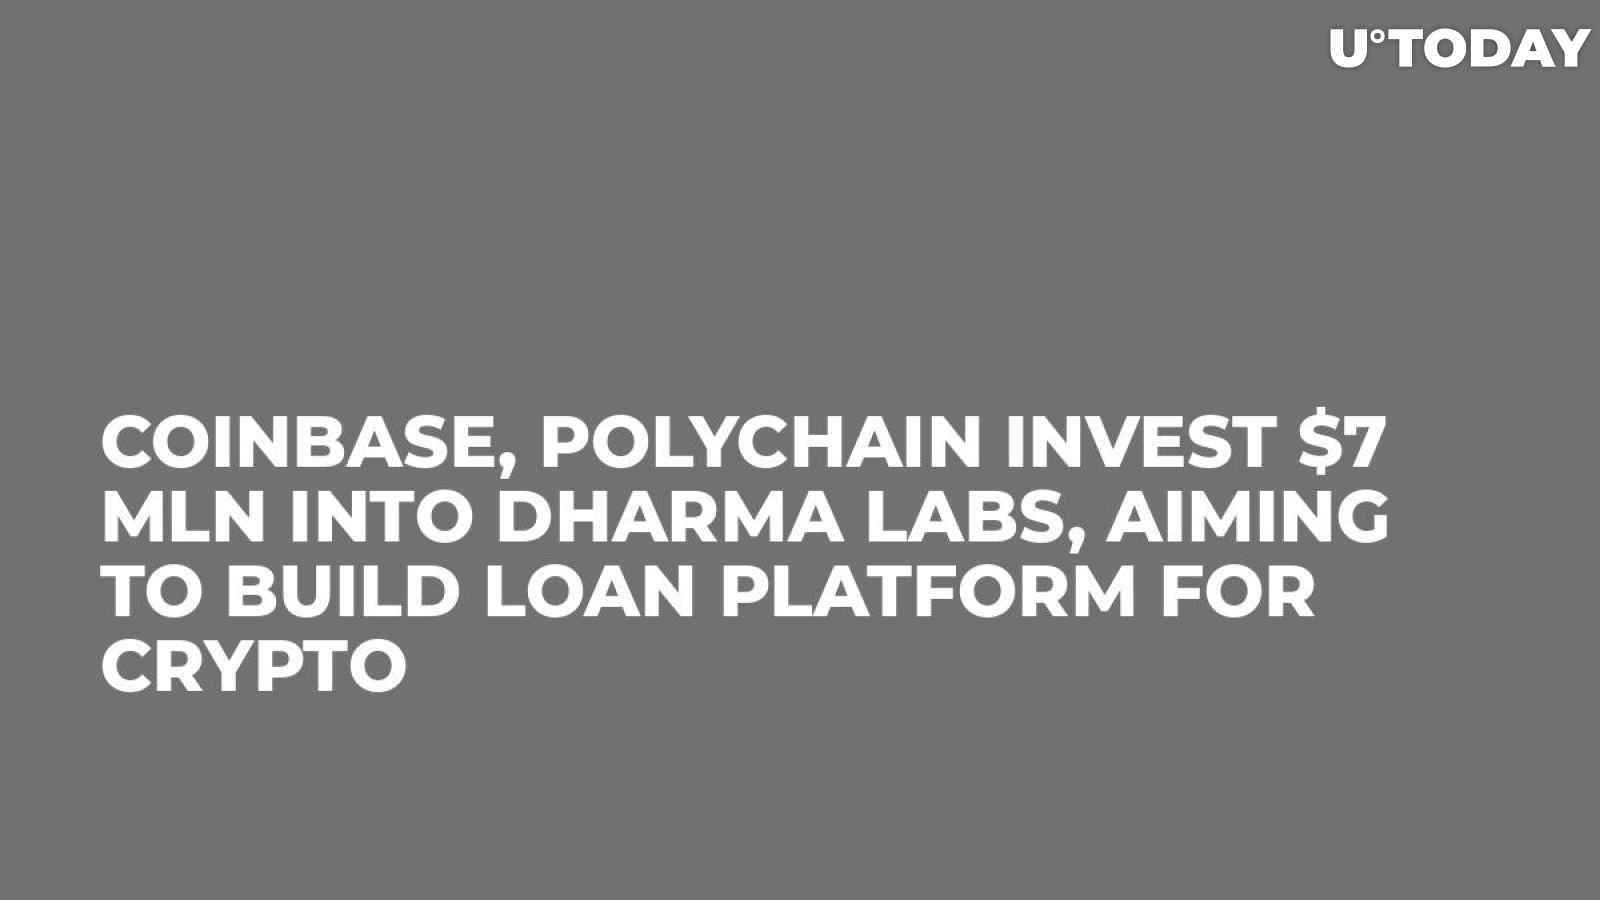 Coinbase, Polychain Invest $7 Mln into Dharma Labs, Aiming to Build Loan Platform for Crypto